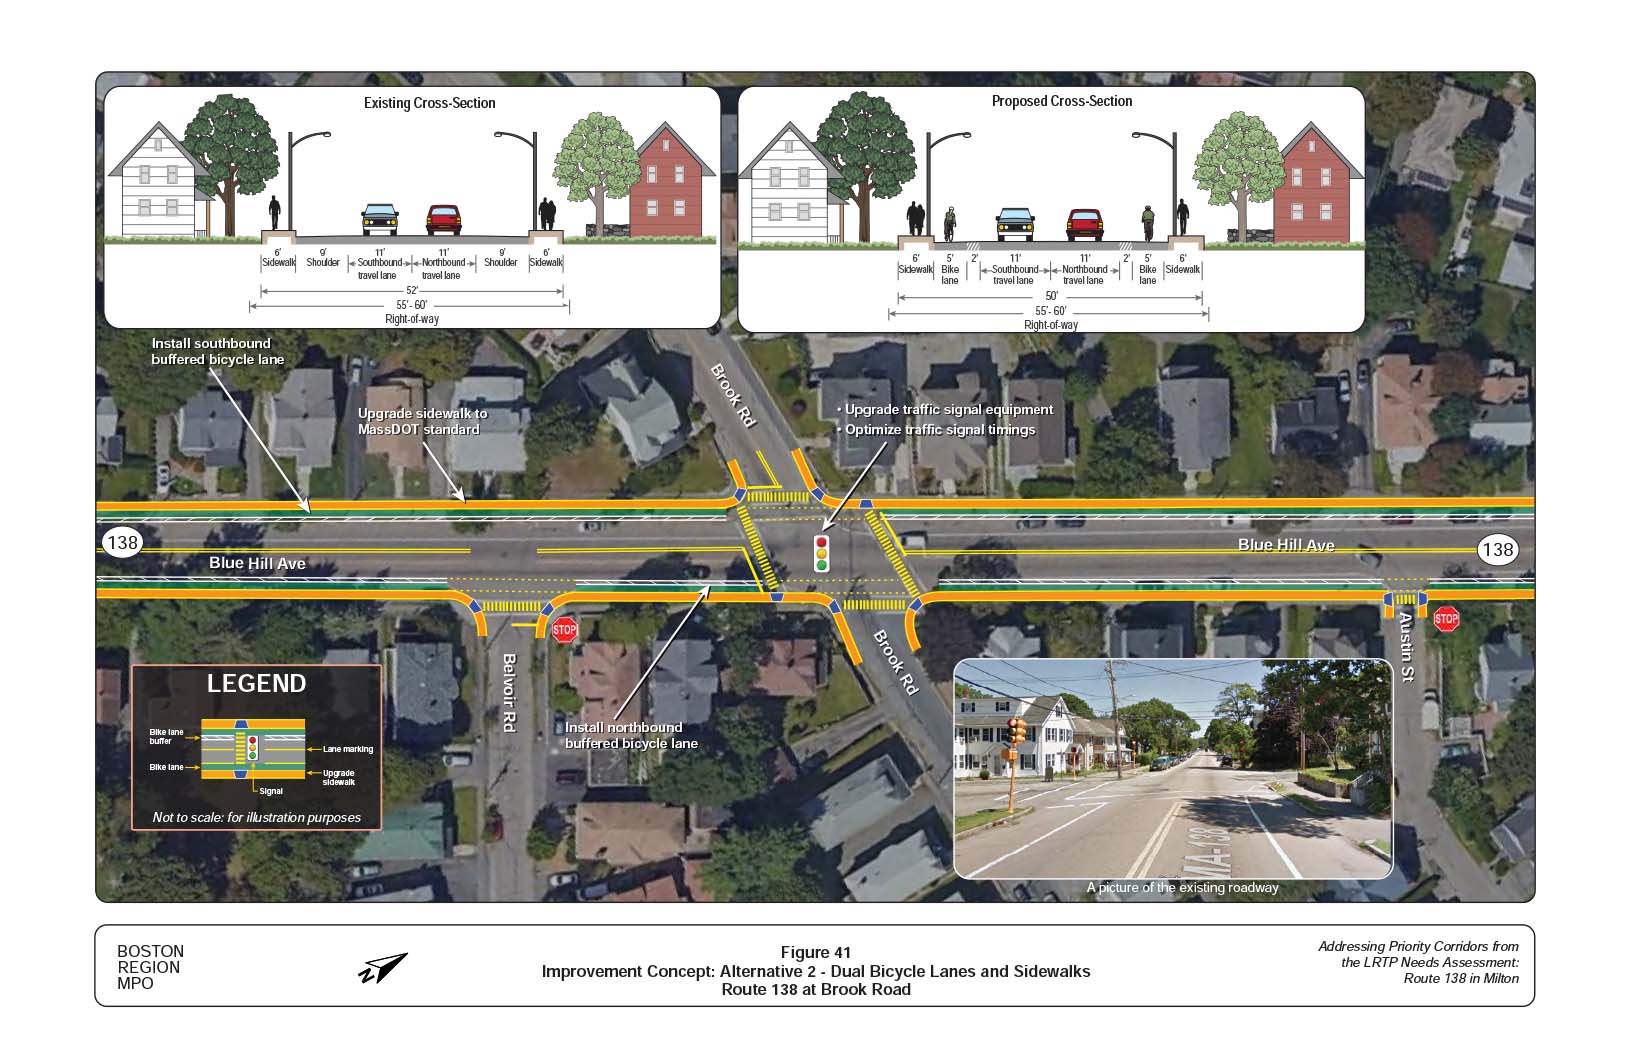 Figure 41 is an aerial photo of Route 138 at Brook Road showing Alternative 2, dual bicycle lanes and sidewalks, and overlays showing the existing and proposed cross-sections.